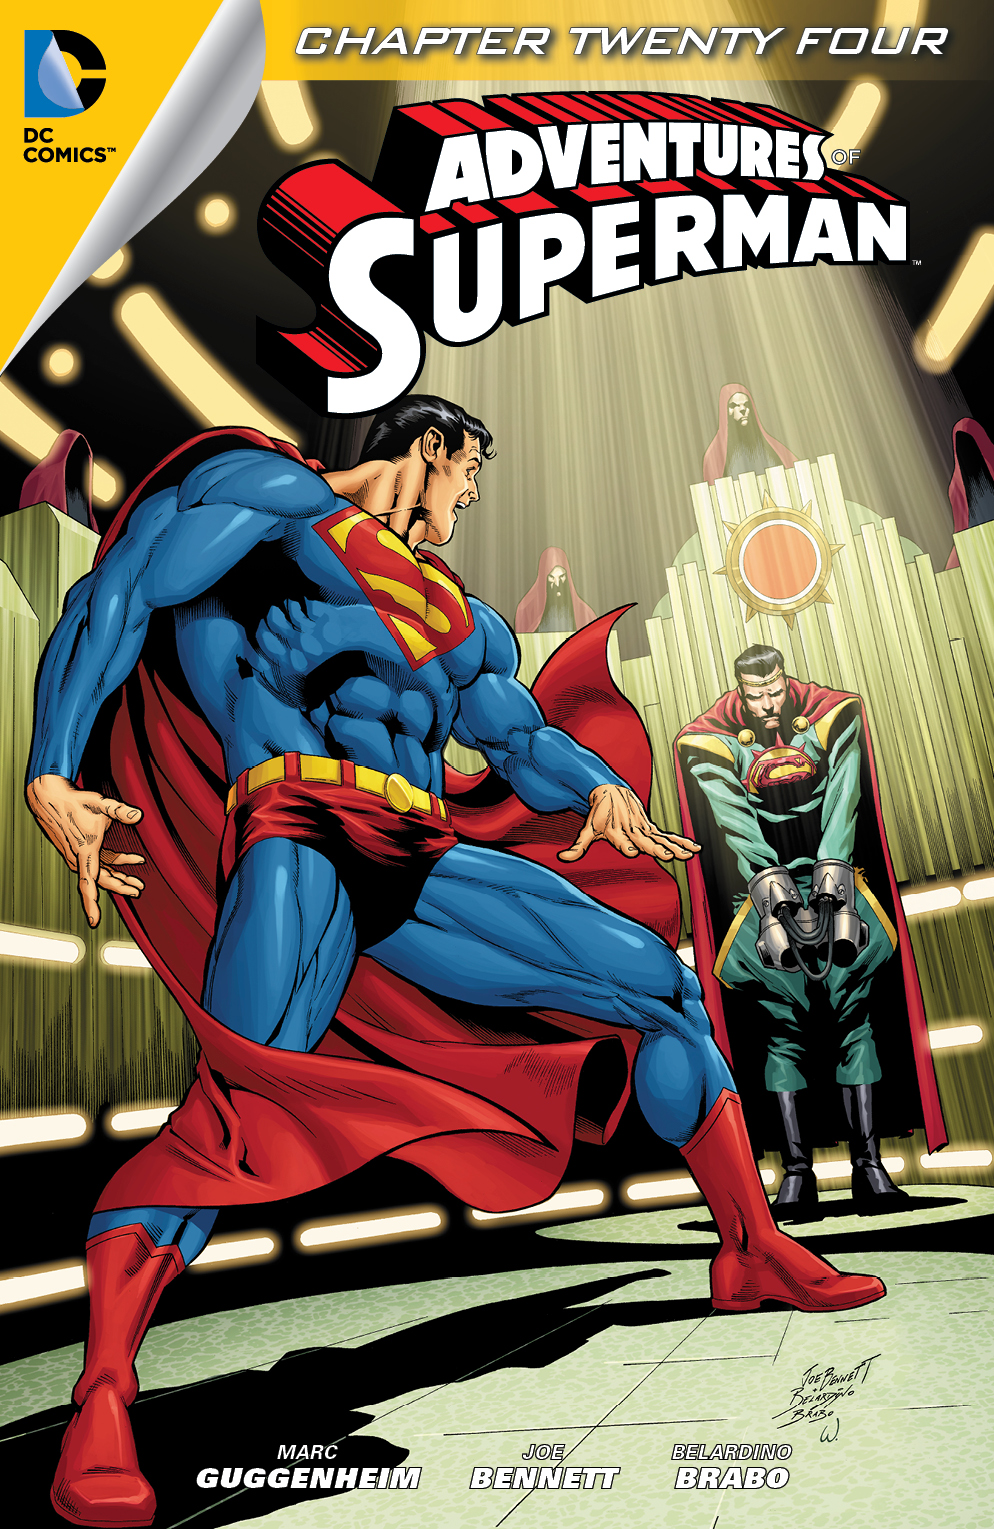 Adventures of Superman (2013-) #24 preview images